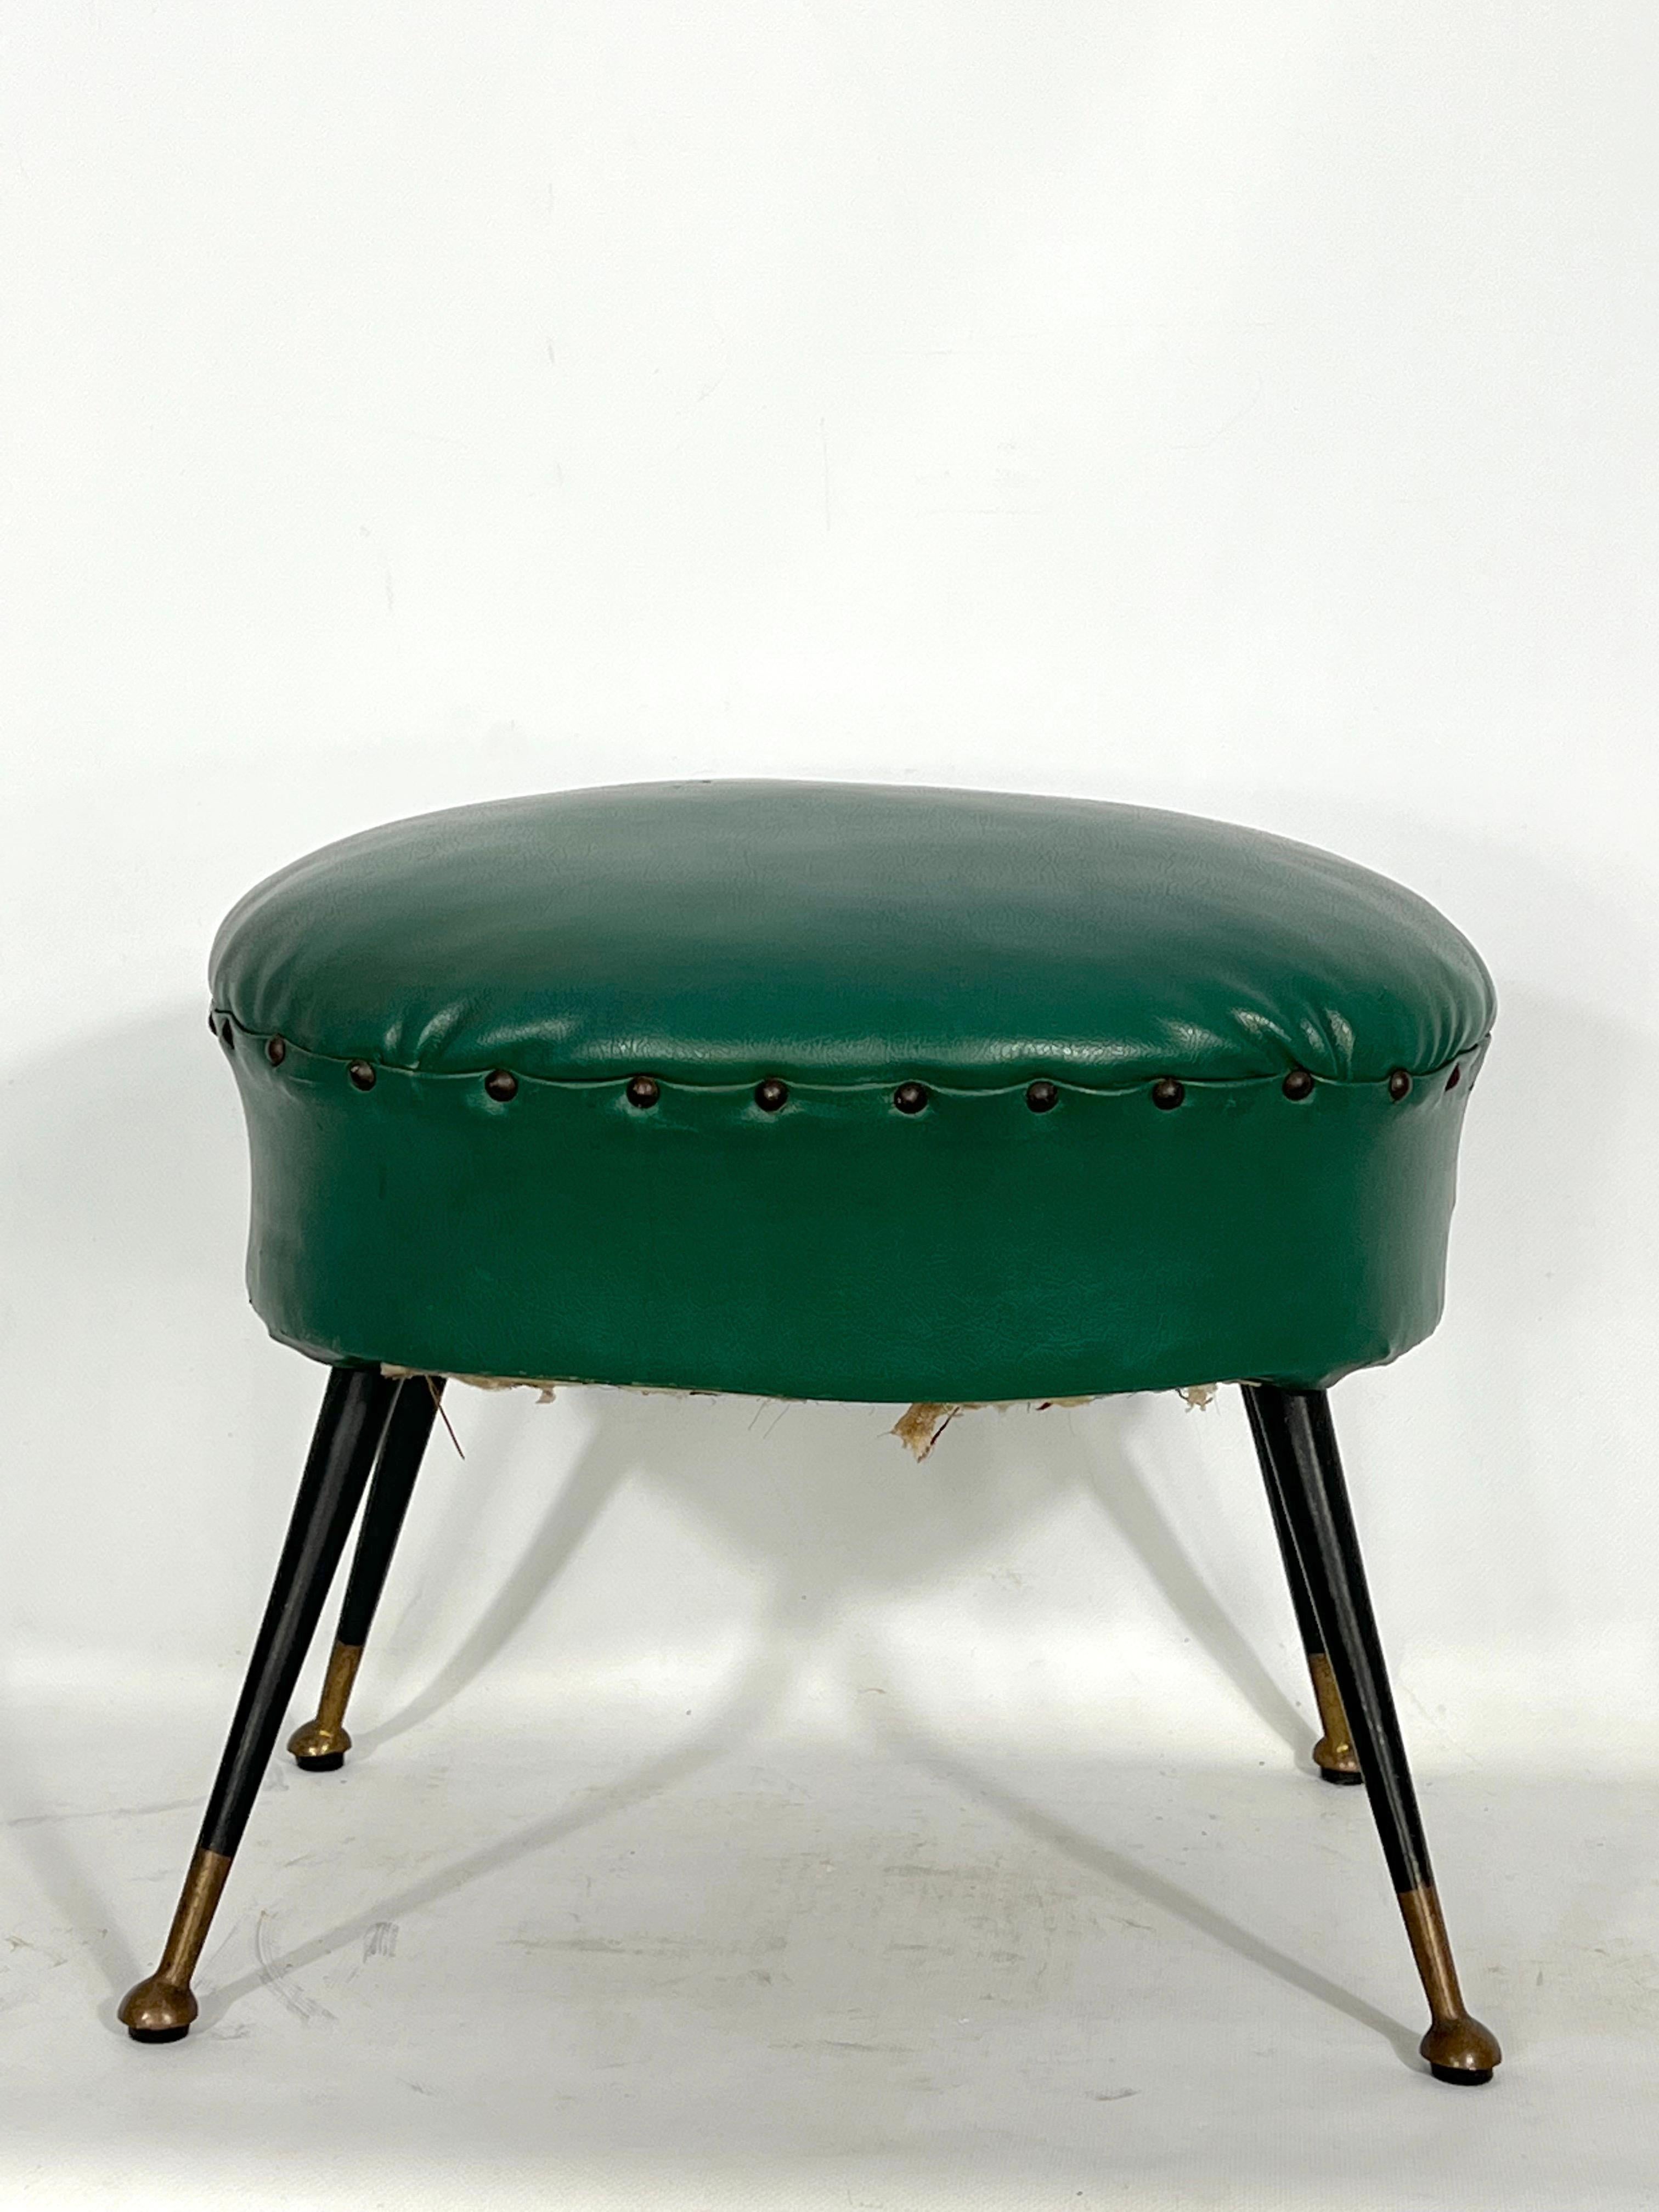 Original vintage condition with trace of age and use for this Italian green leatherette pouf with brass feet. Produced in Italy during the 50s.